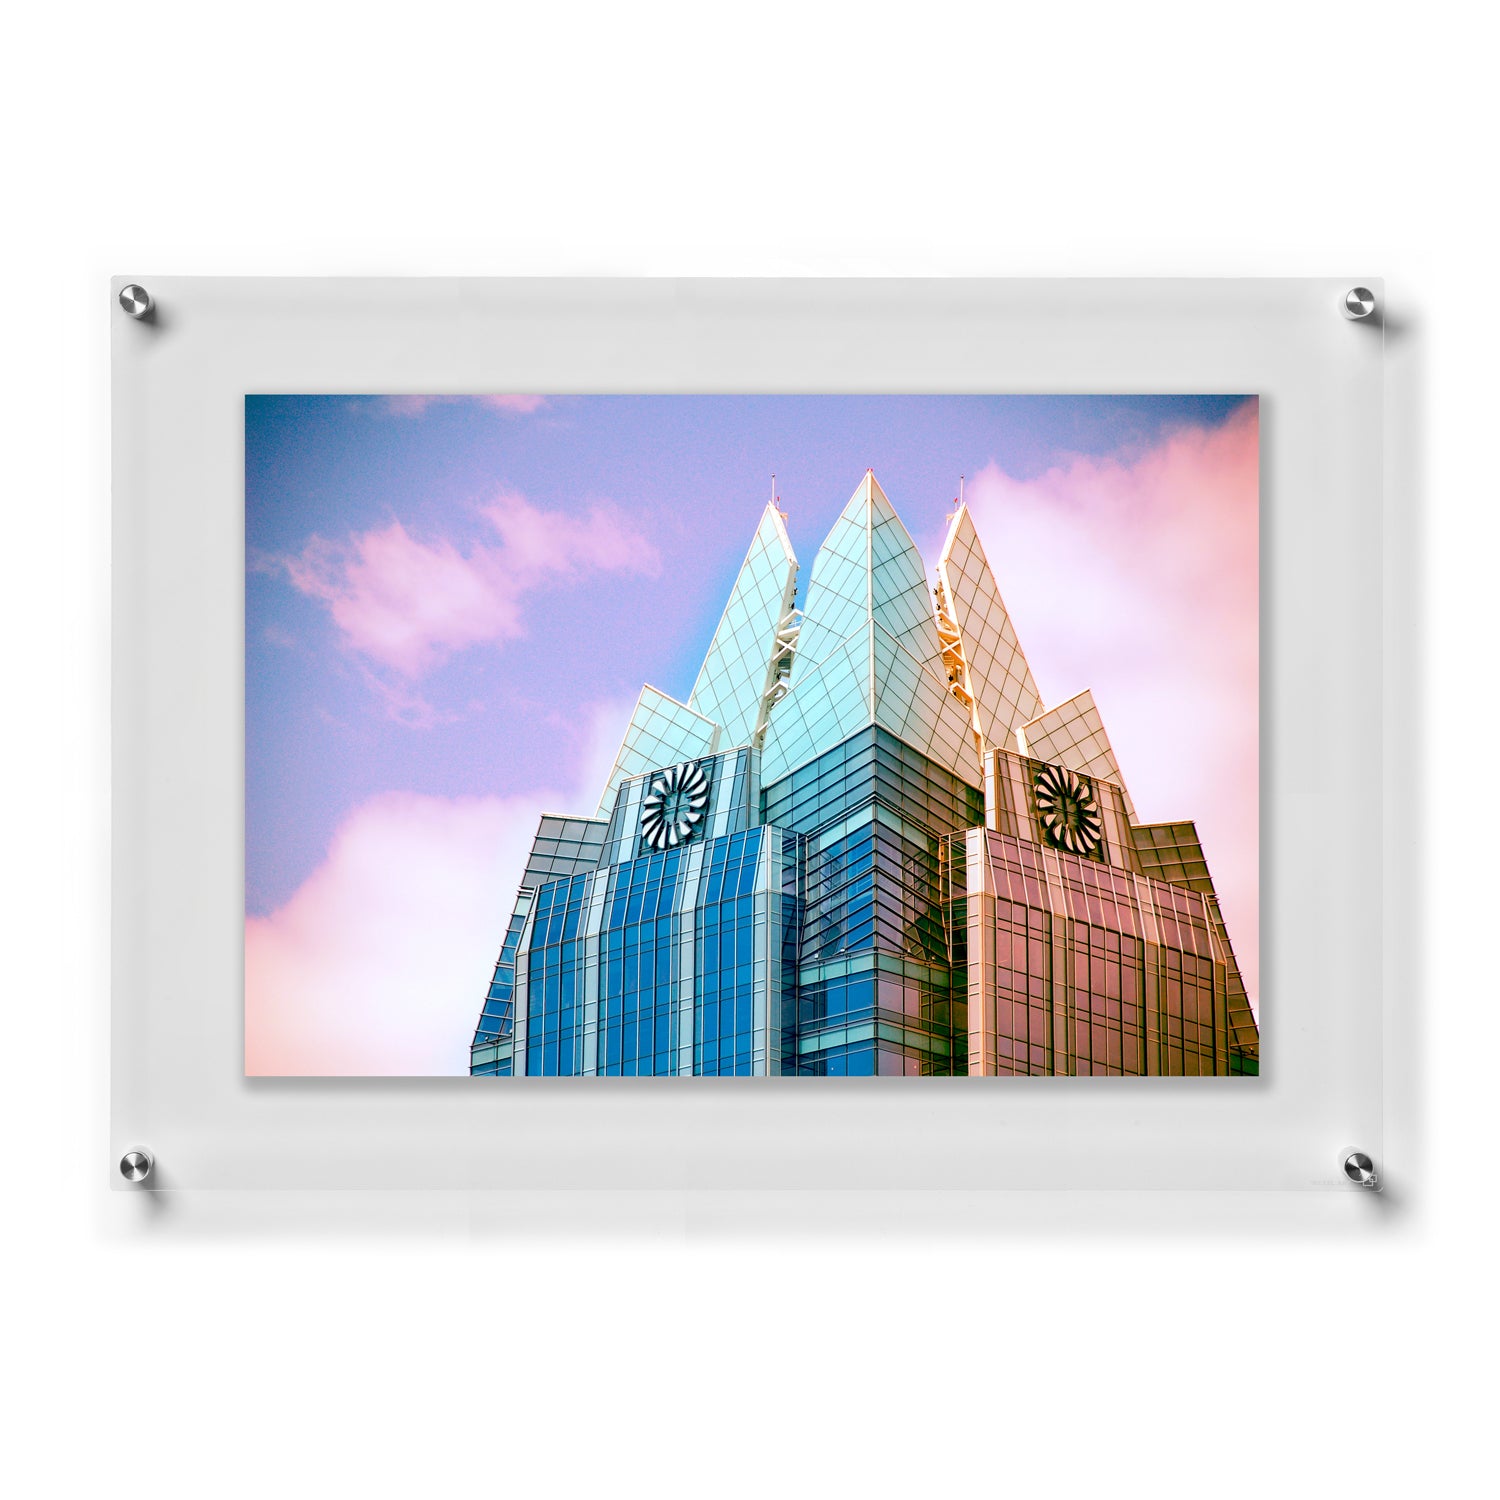 Double Panel Acrylic Float Picture Frame Wexel Art Color: Silver